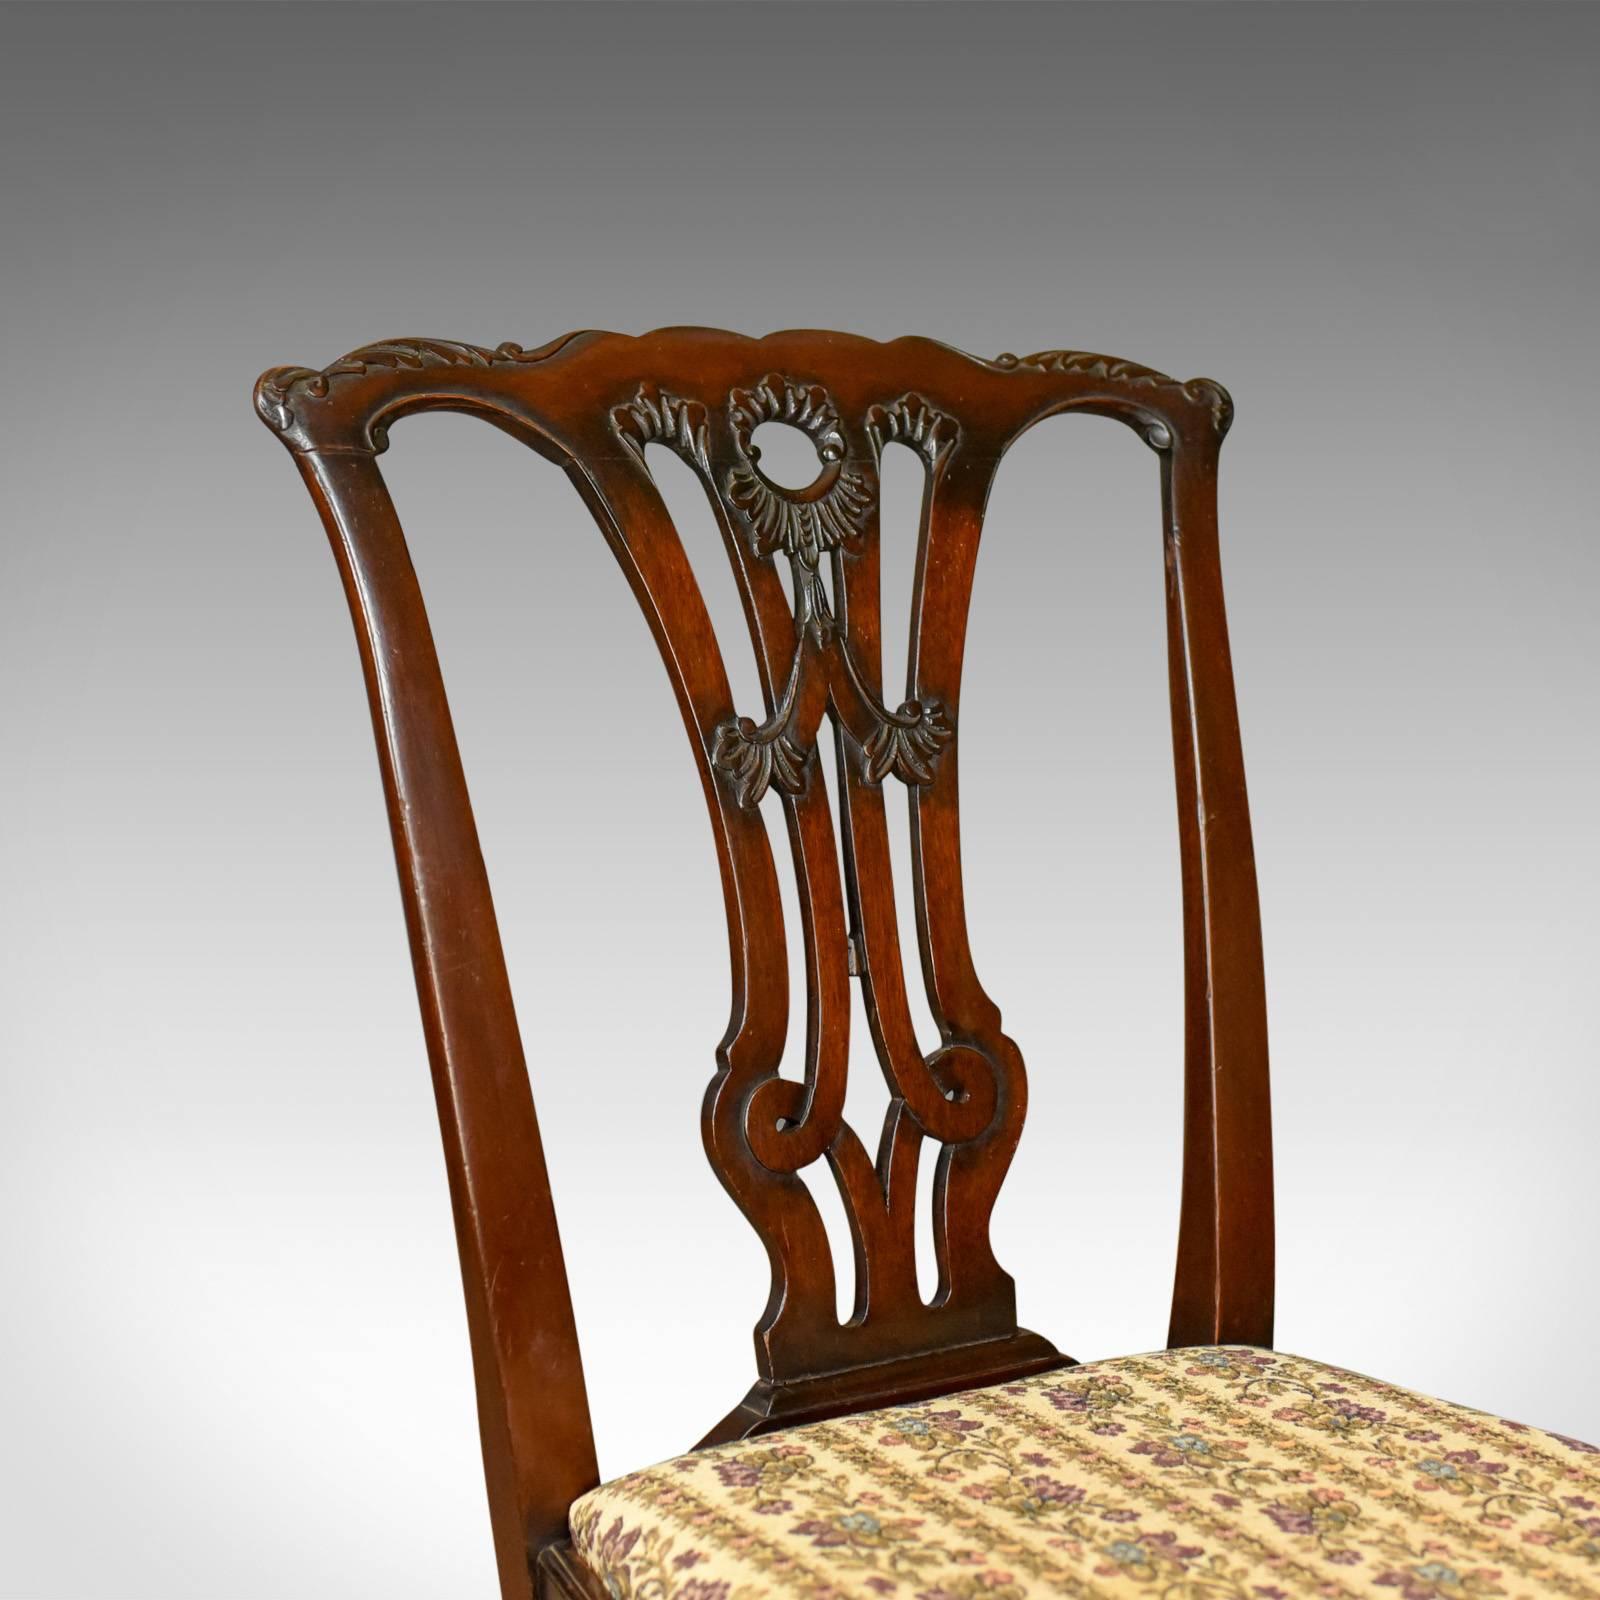 Upholstery Set of Six Antique Dining Chairs English Victorian Chippendale Taste, circa 1900